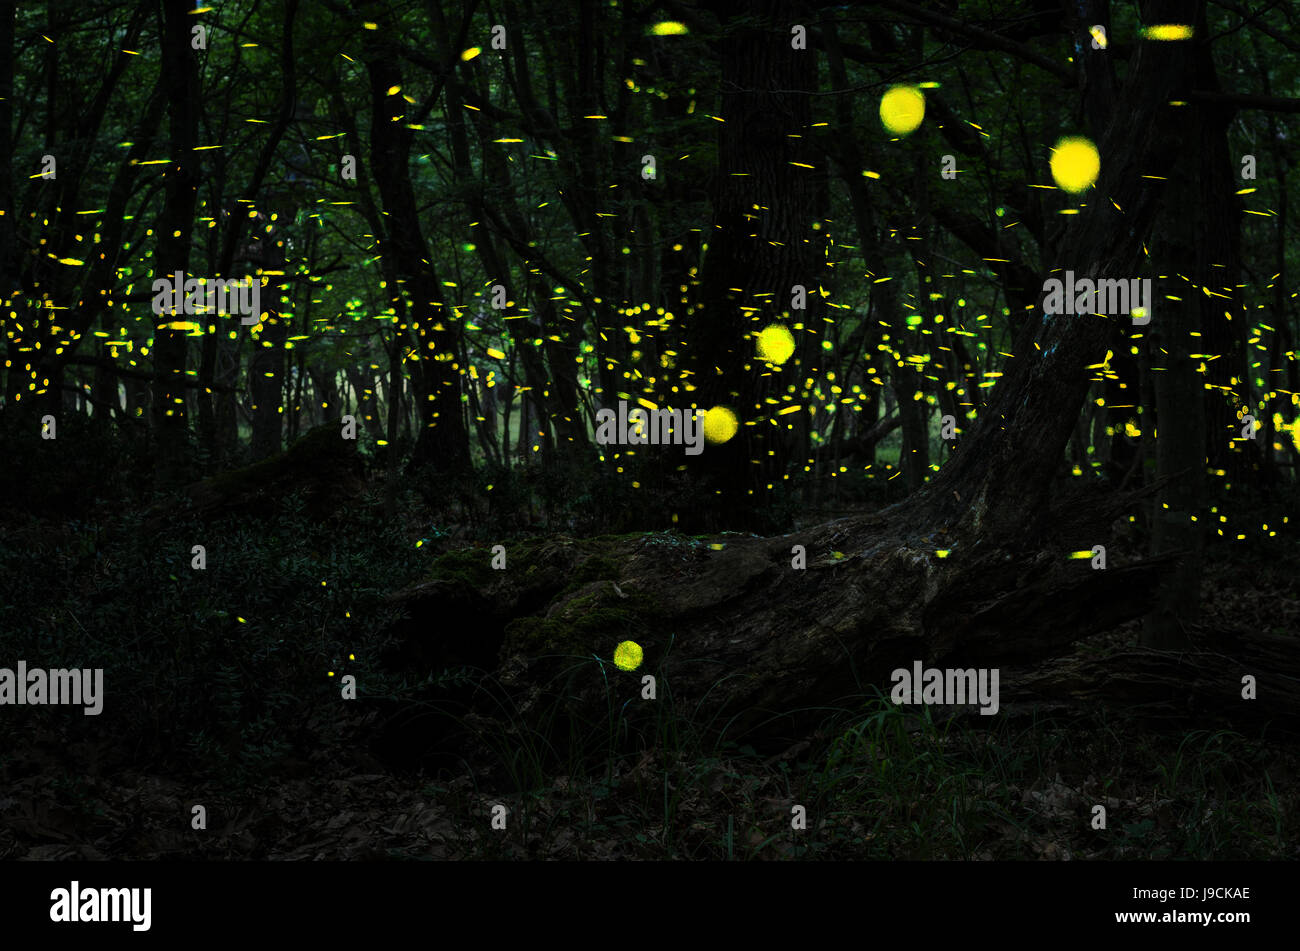 Fireflies/ Night in the forest with fireflies Stock Photo